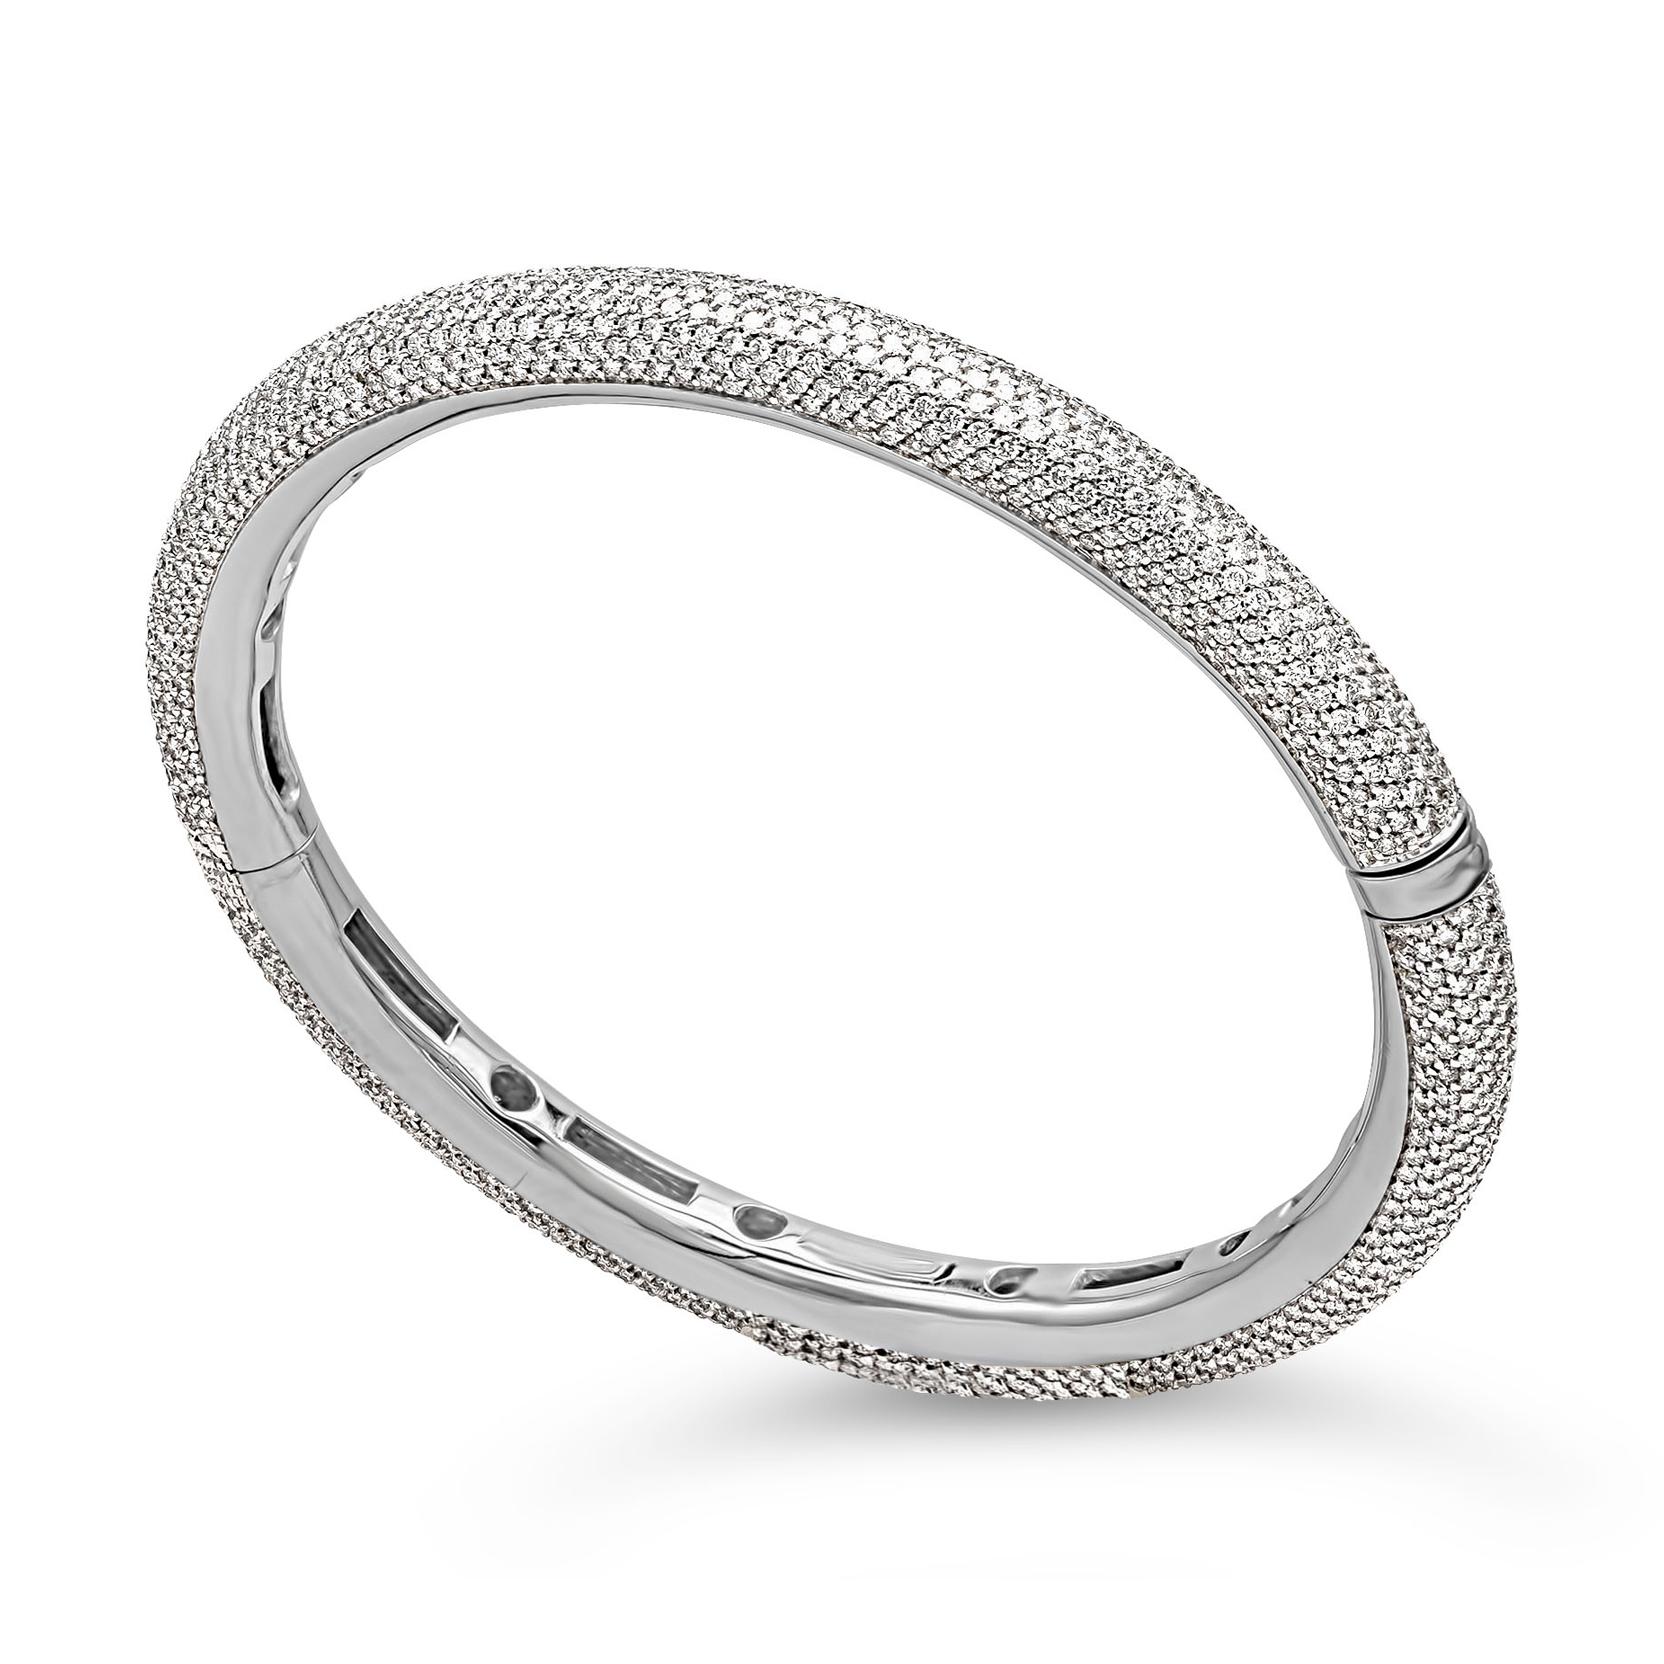 A classic hinge bangle bracelet showcasing a cluster of brilliant round diamonds, weighing 5.78 carats total, F Color and VS in Clarity. Set in a rounded micro-pave setting and Finely made in 18K White Gold.

Roman Malakov is a custom house,